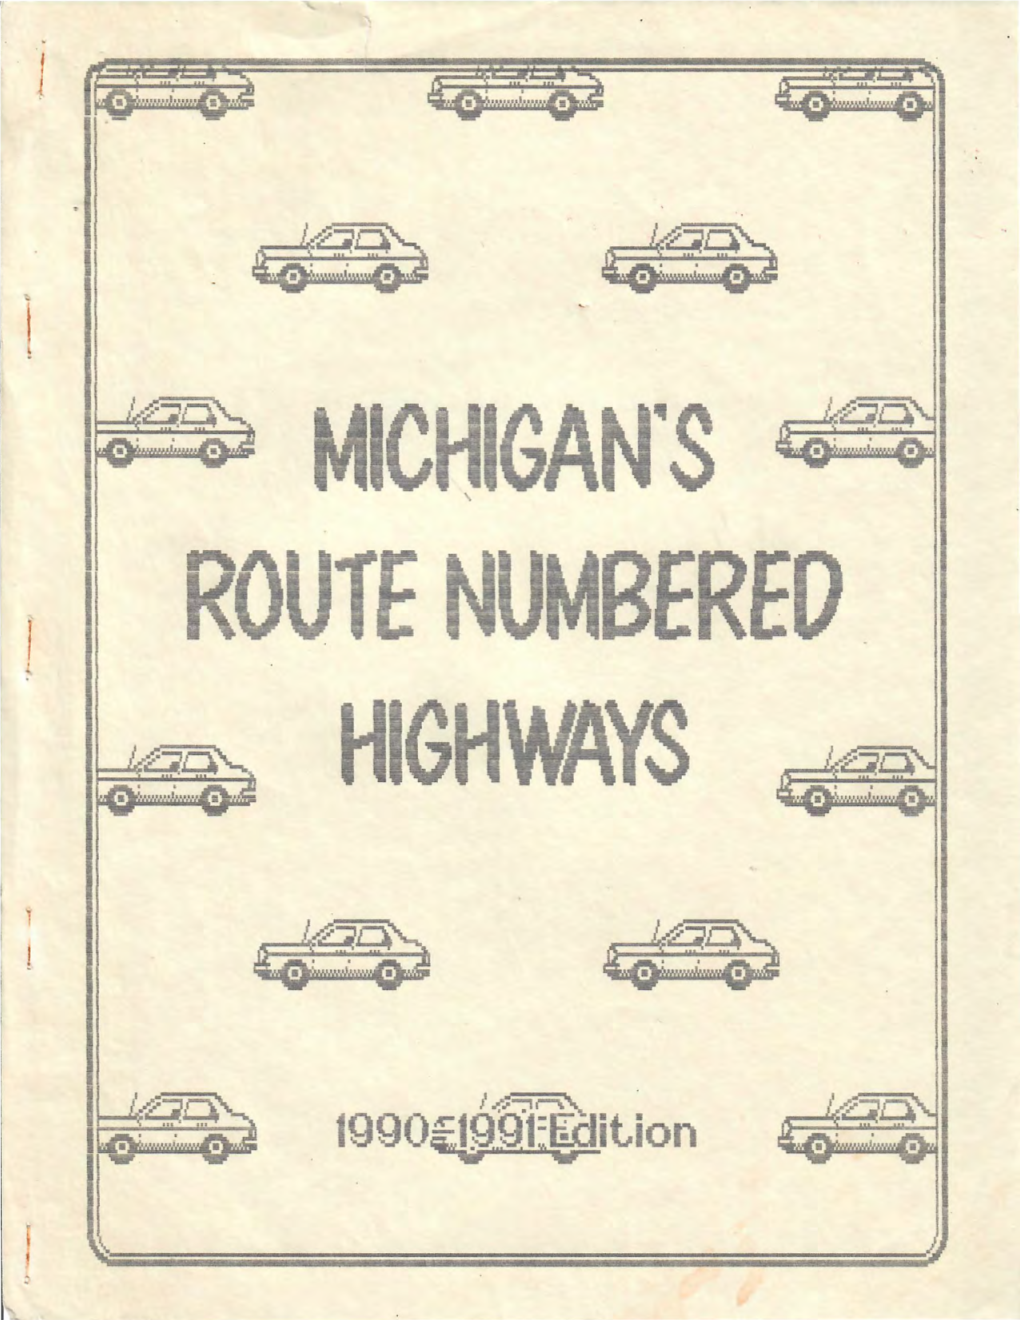 MICHIGAN's ROUTE NUMBERED HIGHWAYS 1990-1991 Edition